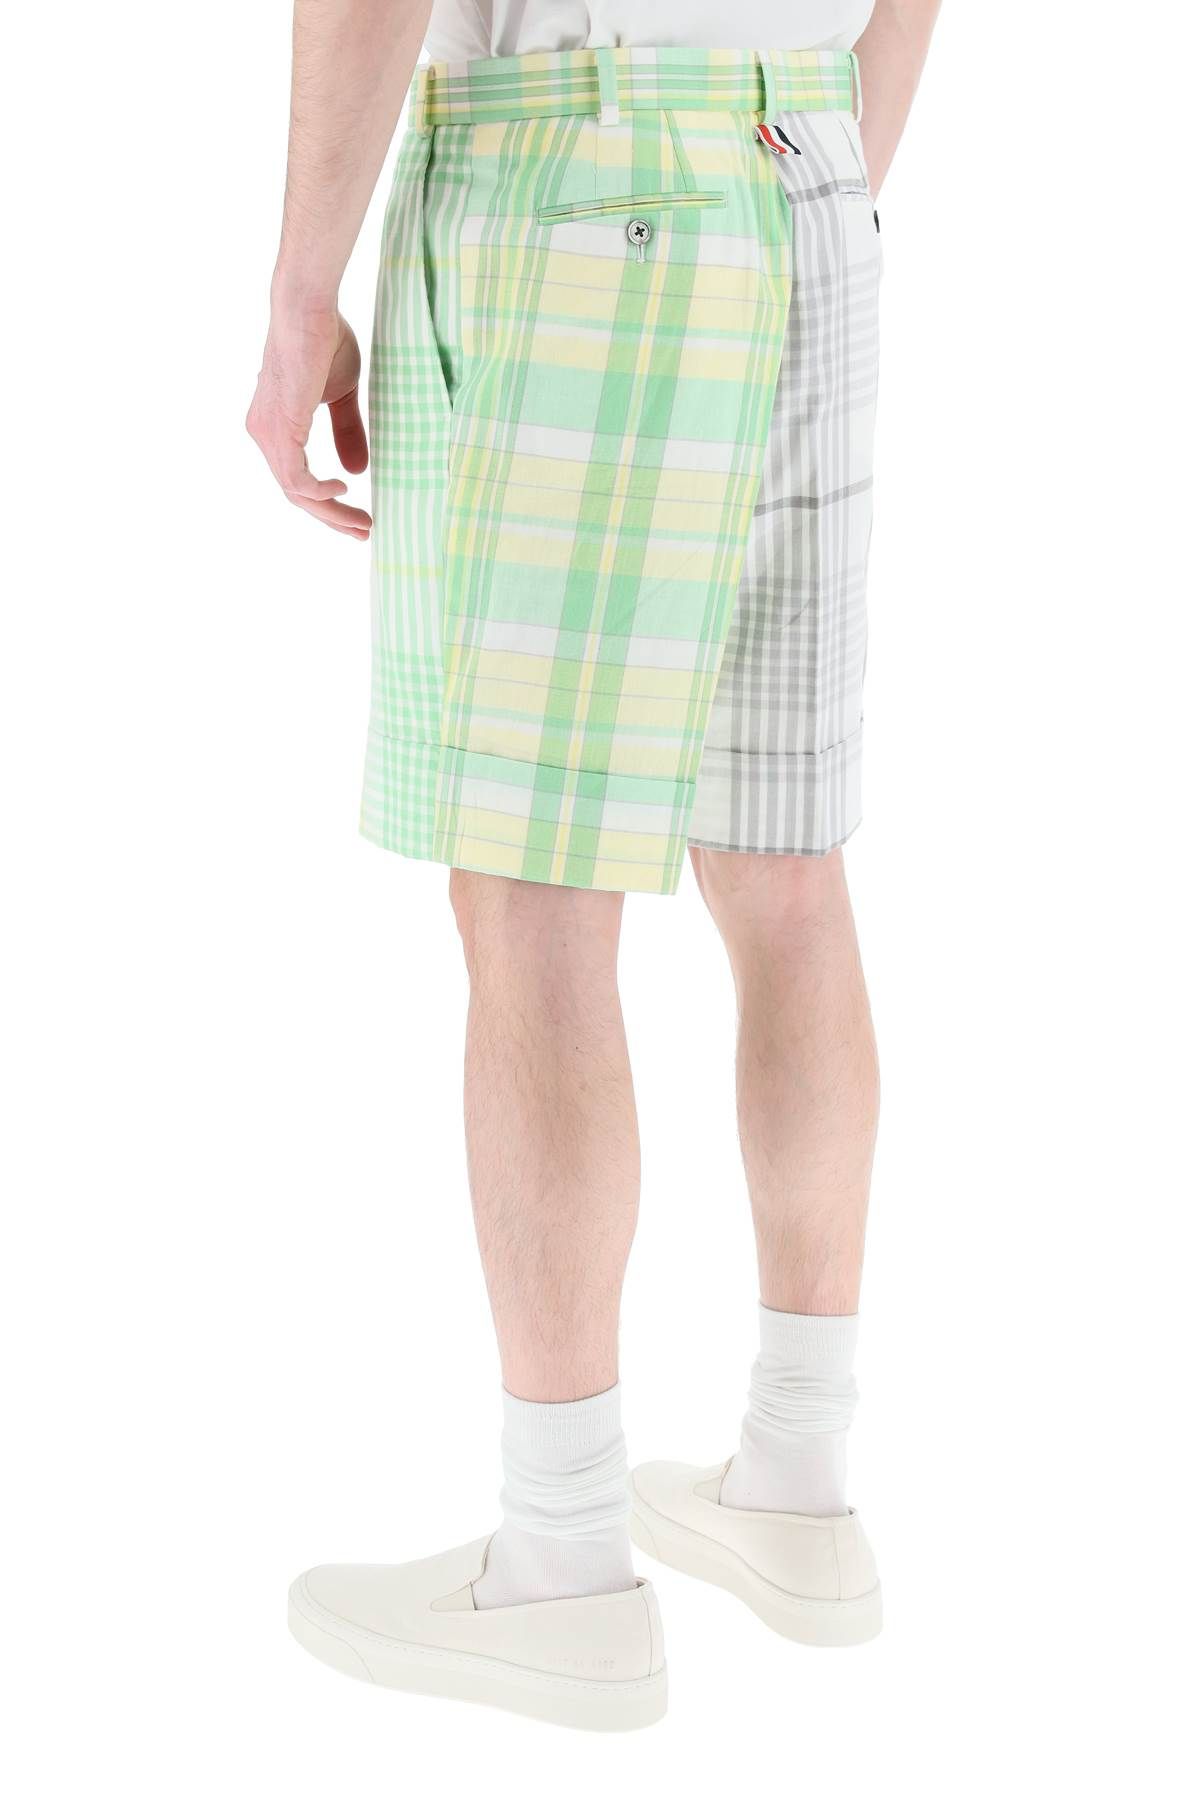 Shop Thom Browne Funmix Madras Cotton Shorts In White,grey,green